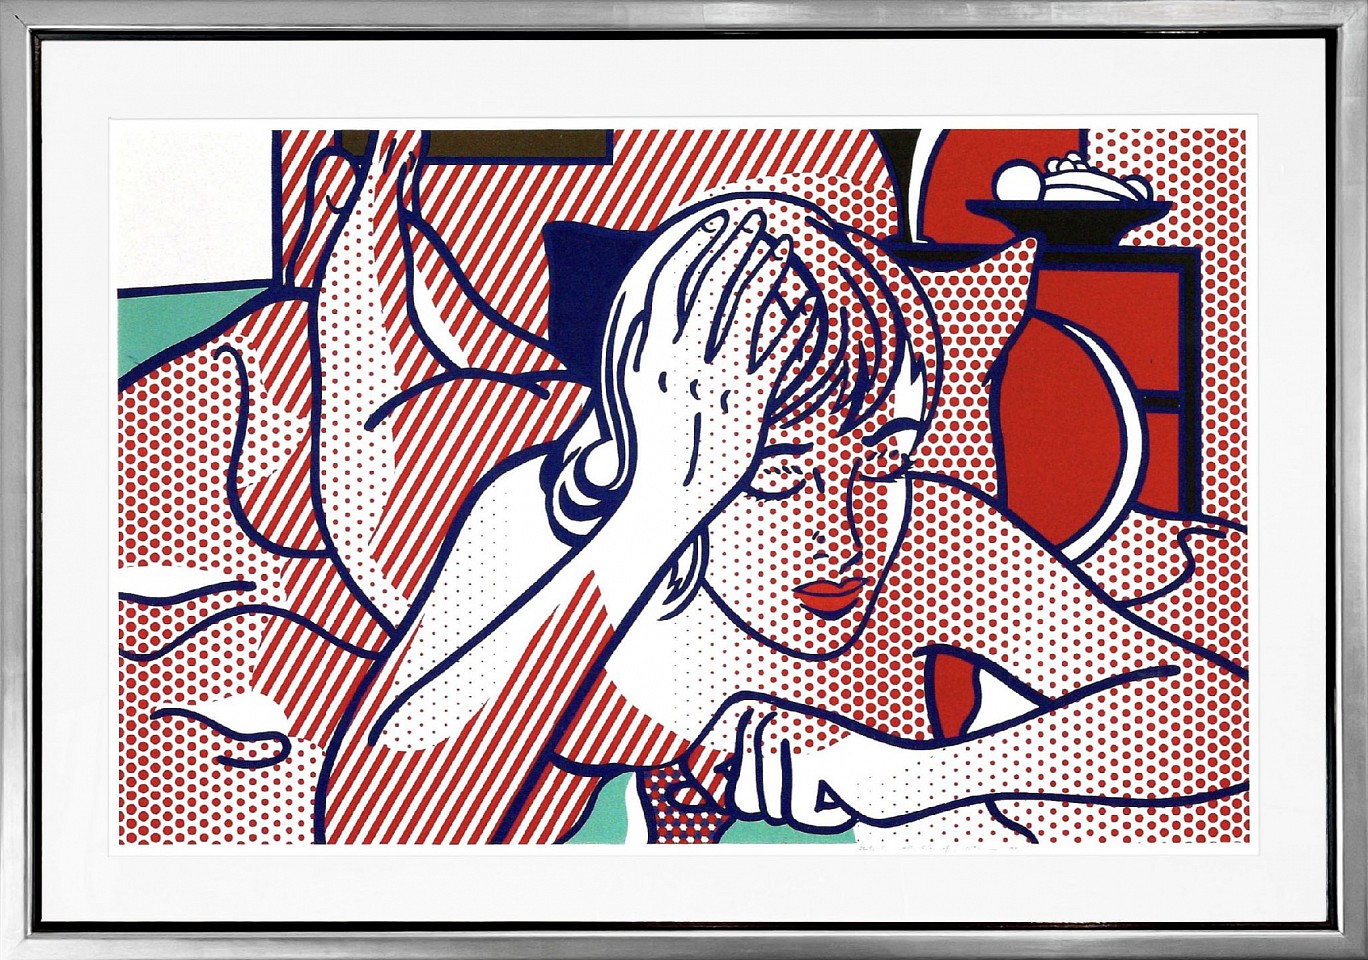 Roy Lichtenstein, Thinking Nude; State I; edition AP 6/6, 1994
Relief print on BFK Rives mold-made paper
LICH00009